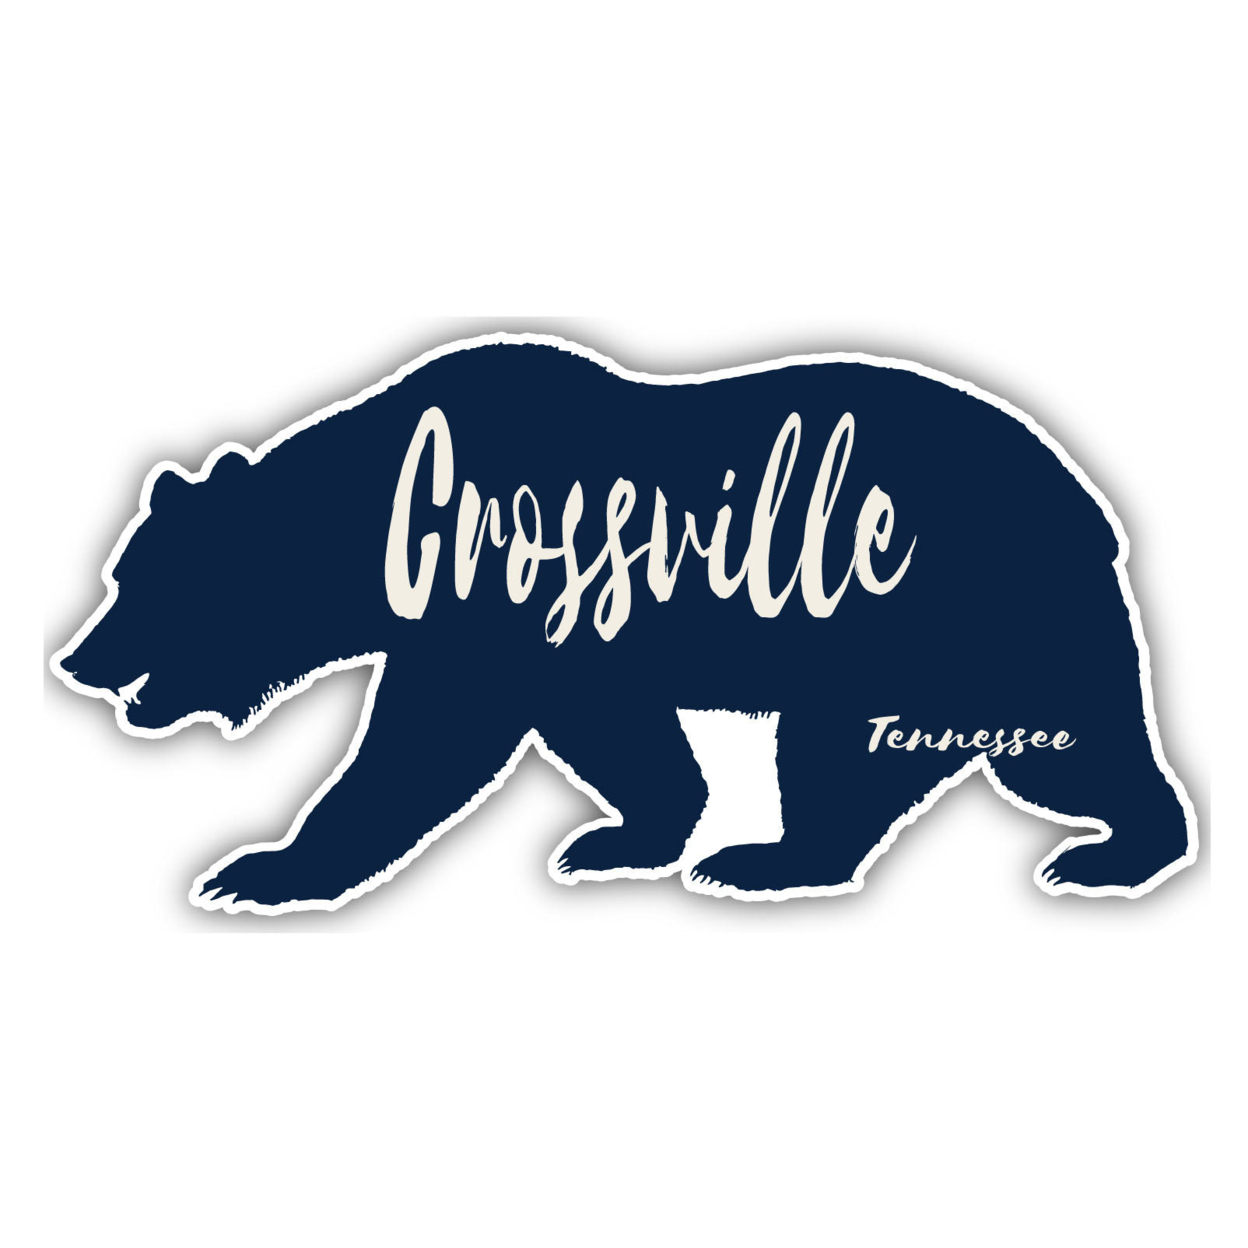 Crossville Tennessee Souvenir Decorative Stickers (Choose Theme And Size) - Single Unit, 12-Inch, Adventures Awaits